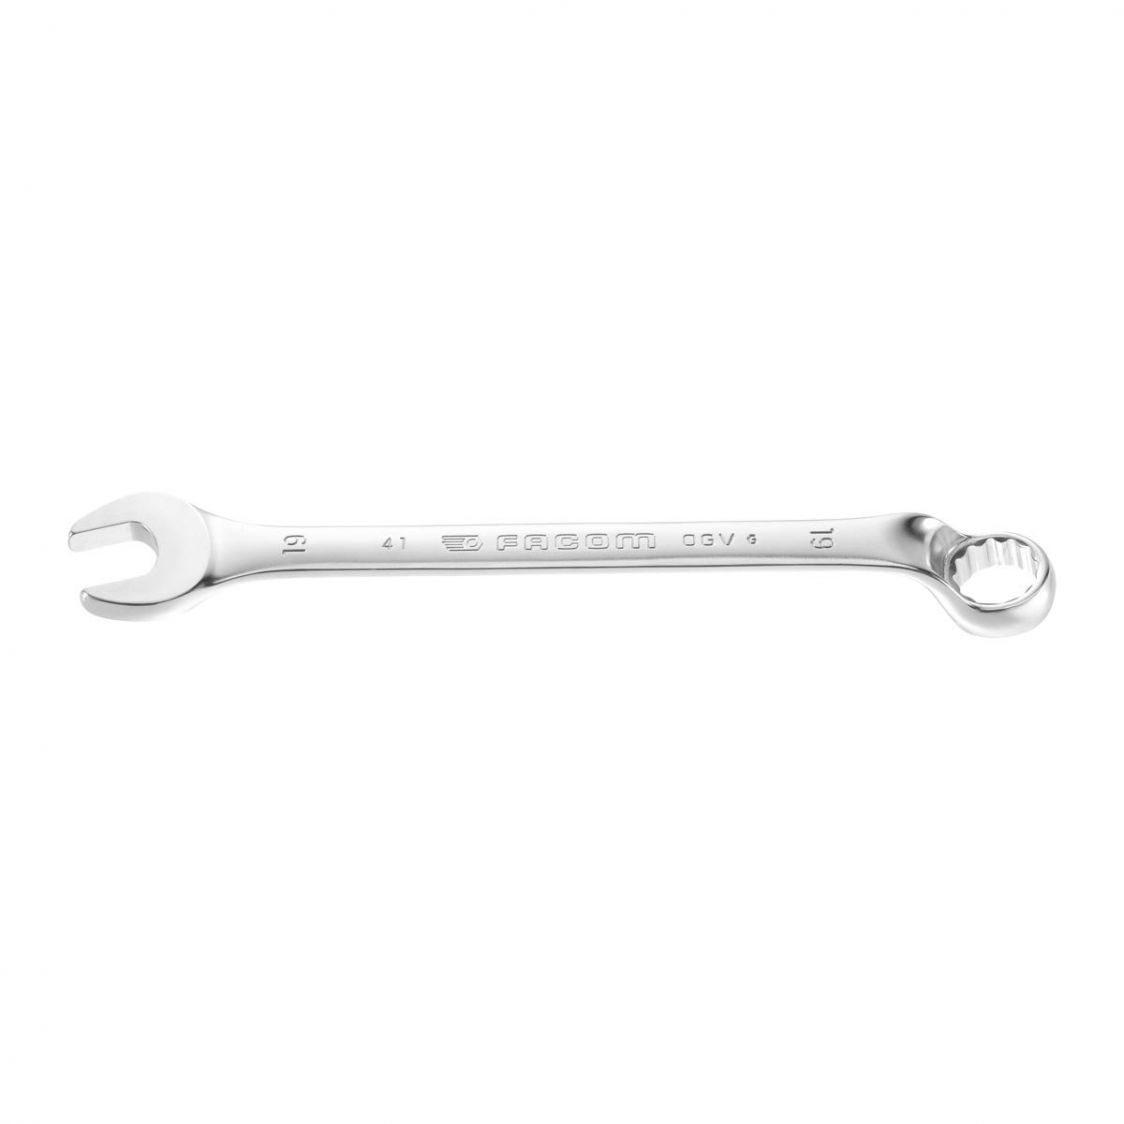 FACOM 41.17 - 17mm Metric Offset Combination Spanner